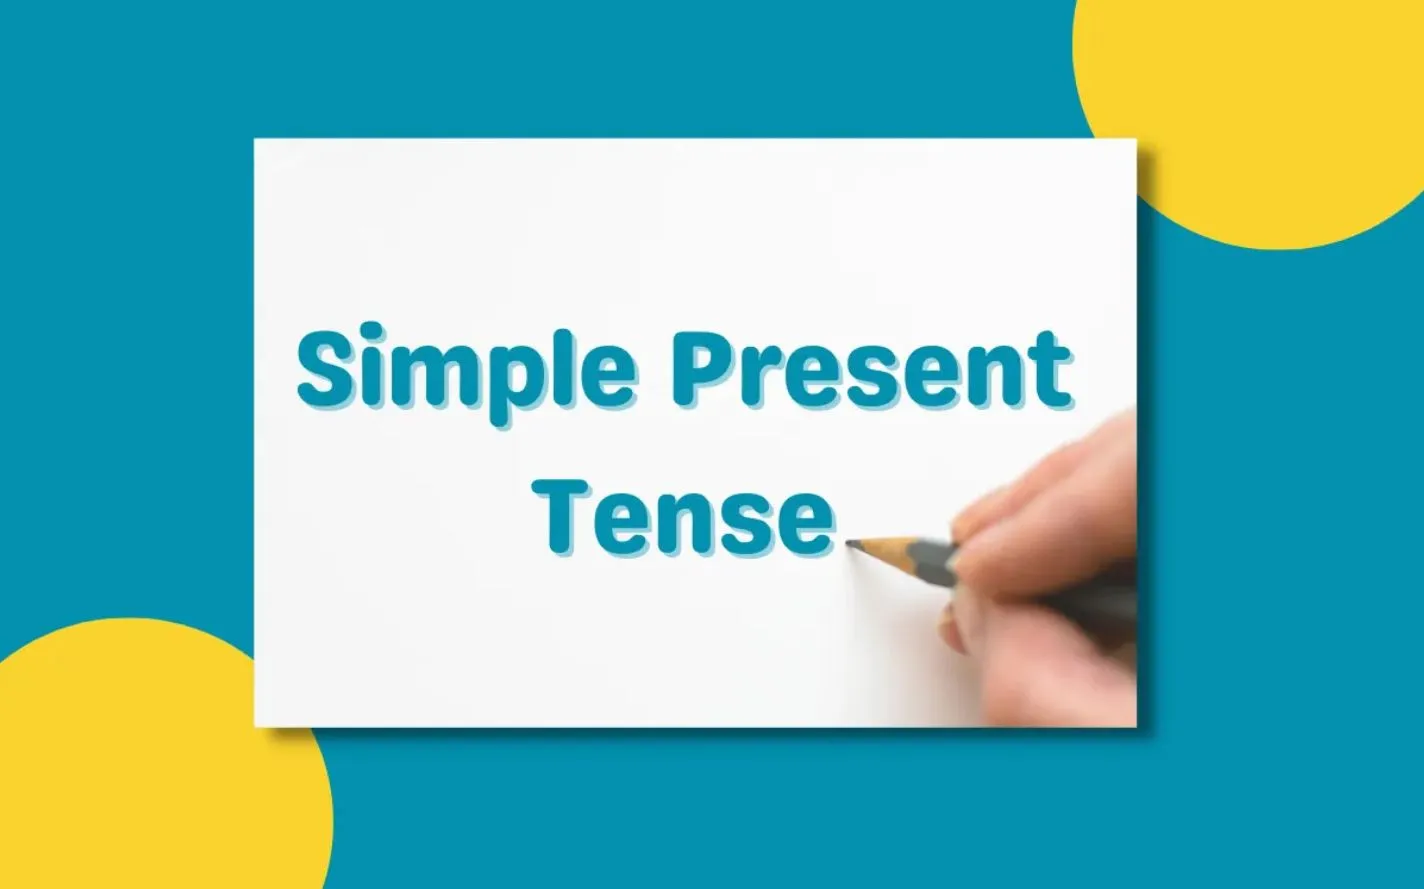 Example Sentences with Simple Present Tense